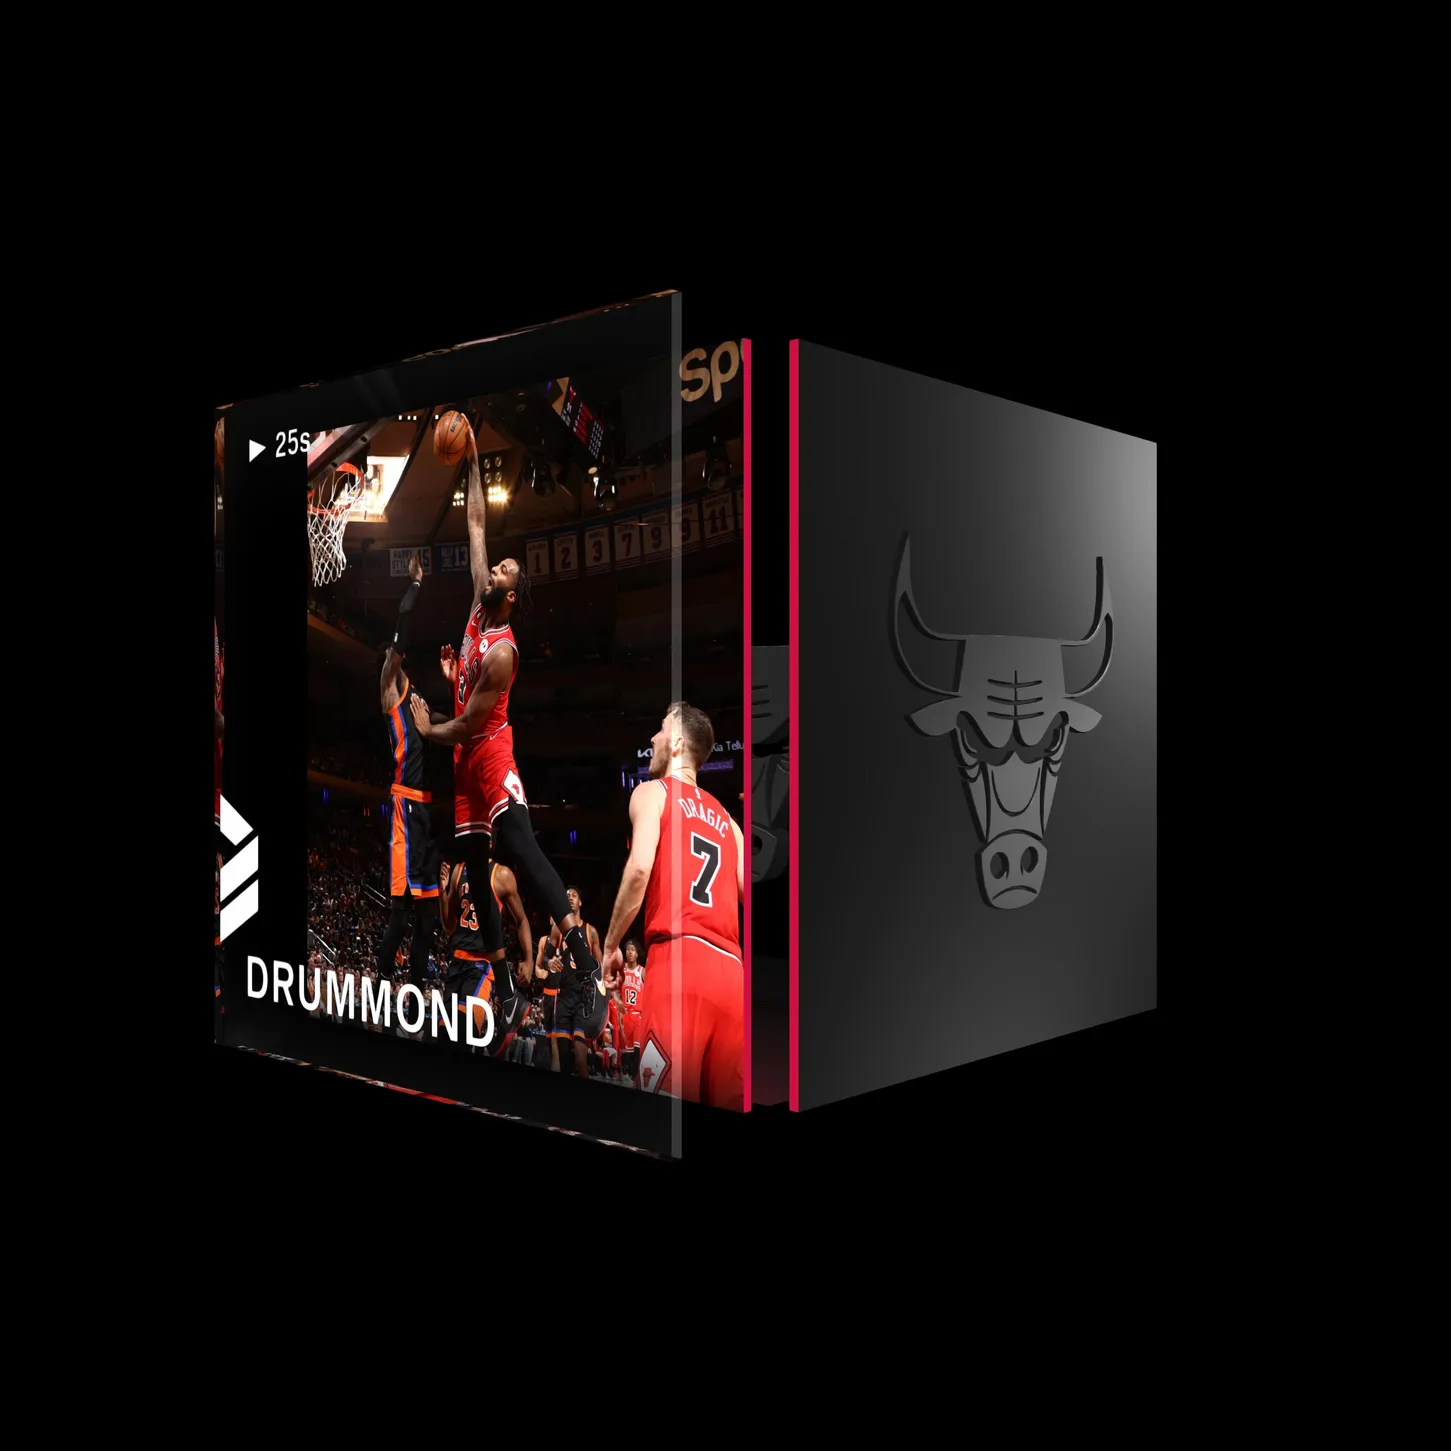 Andre Drummond asset